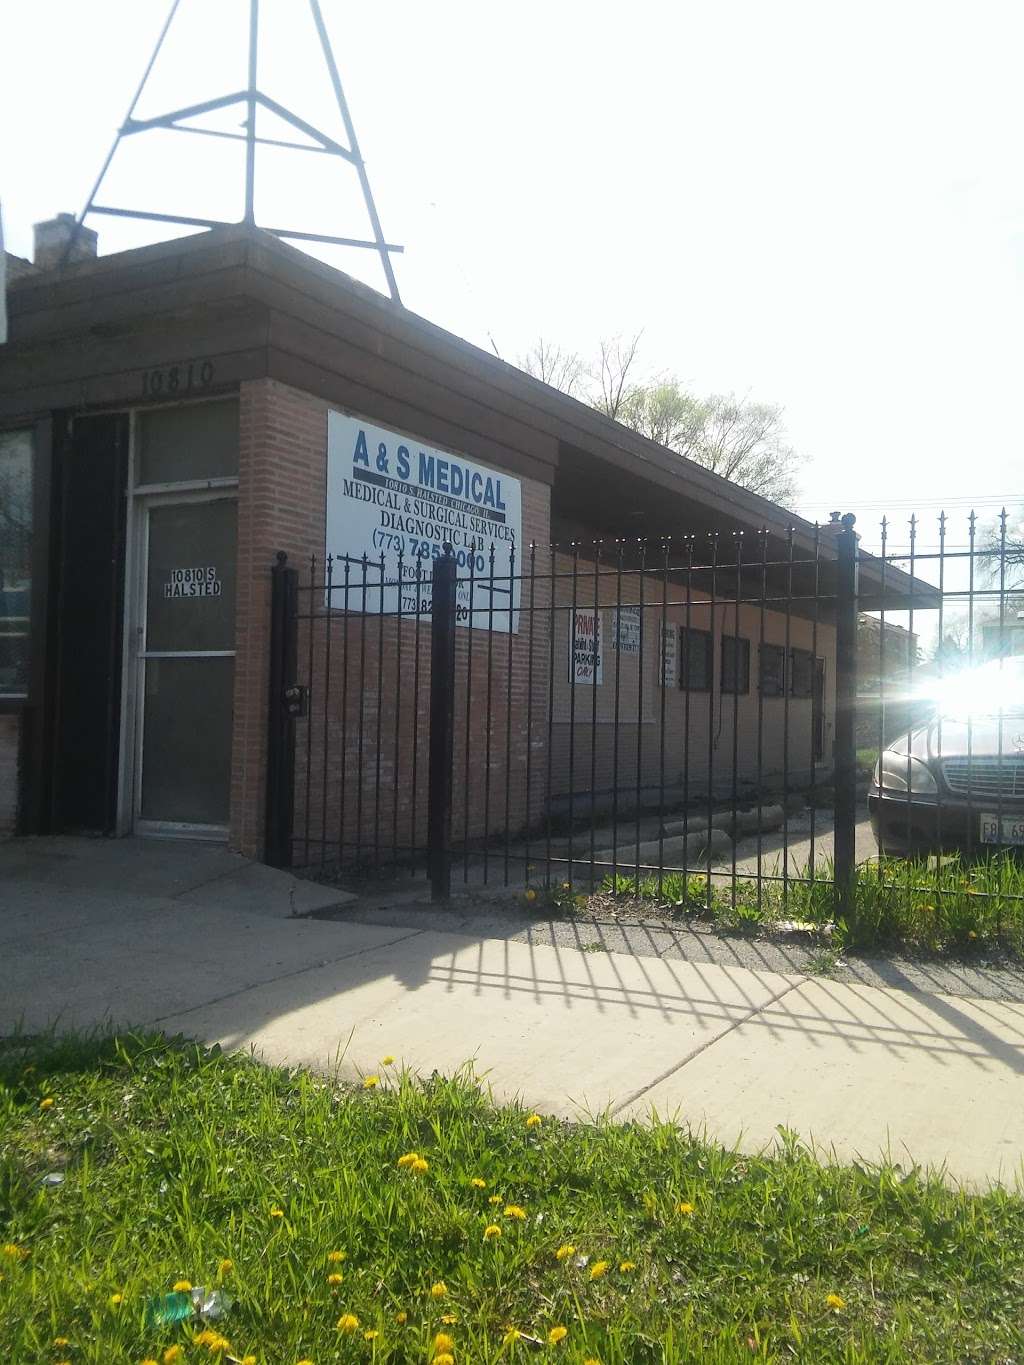 A & S Medical Building | 10810 S Halsted St, Chicago, IL 60628 | Phone: (773) 785-9000